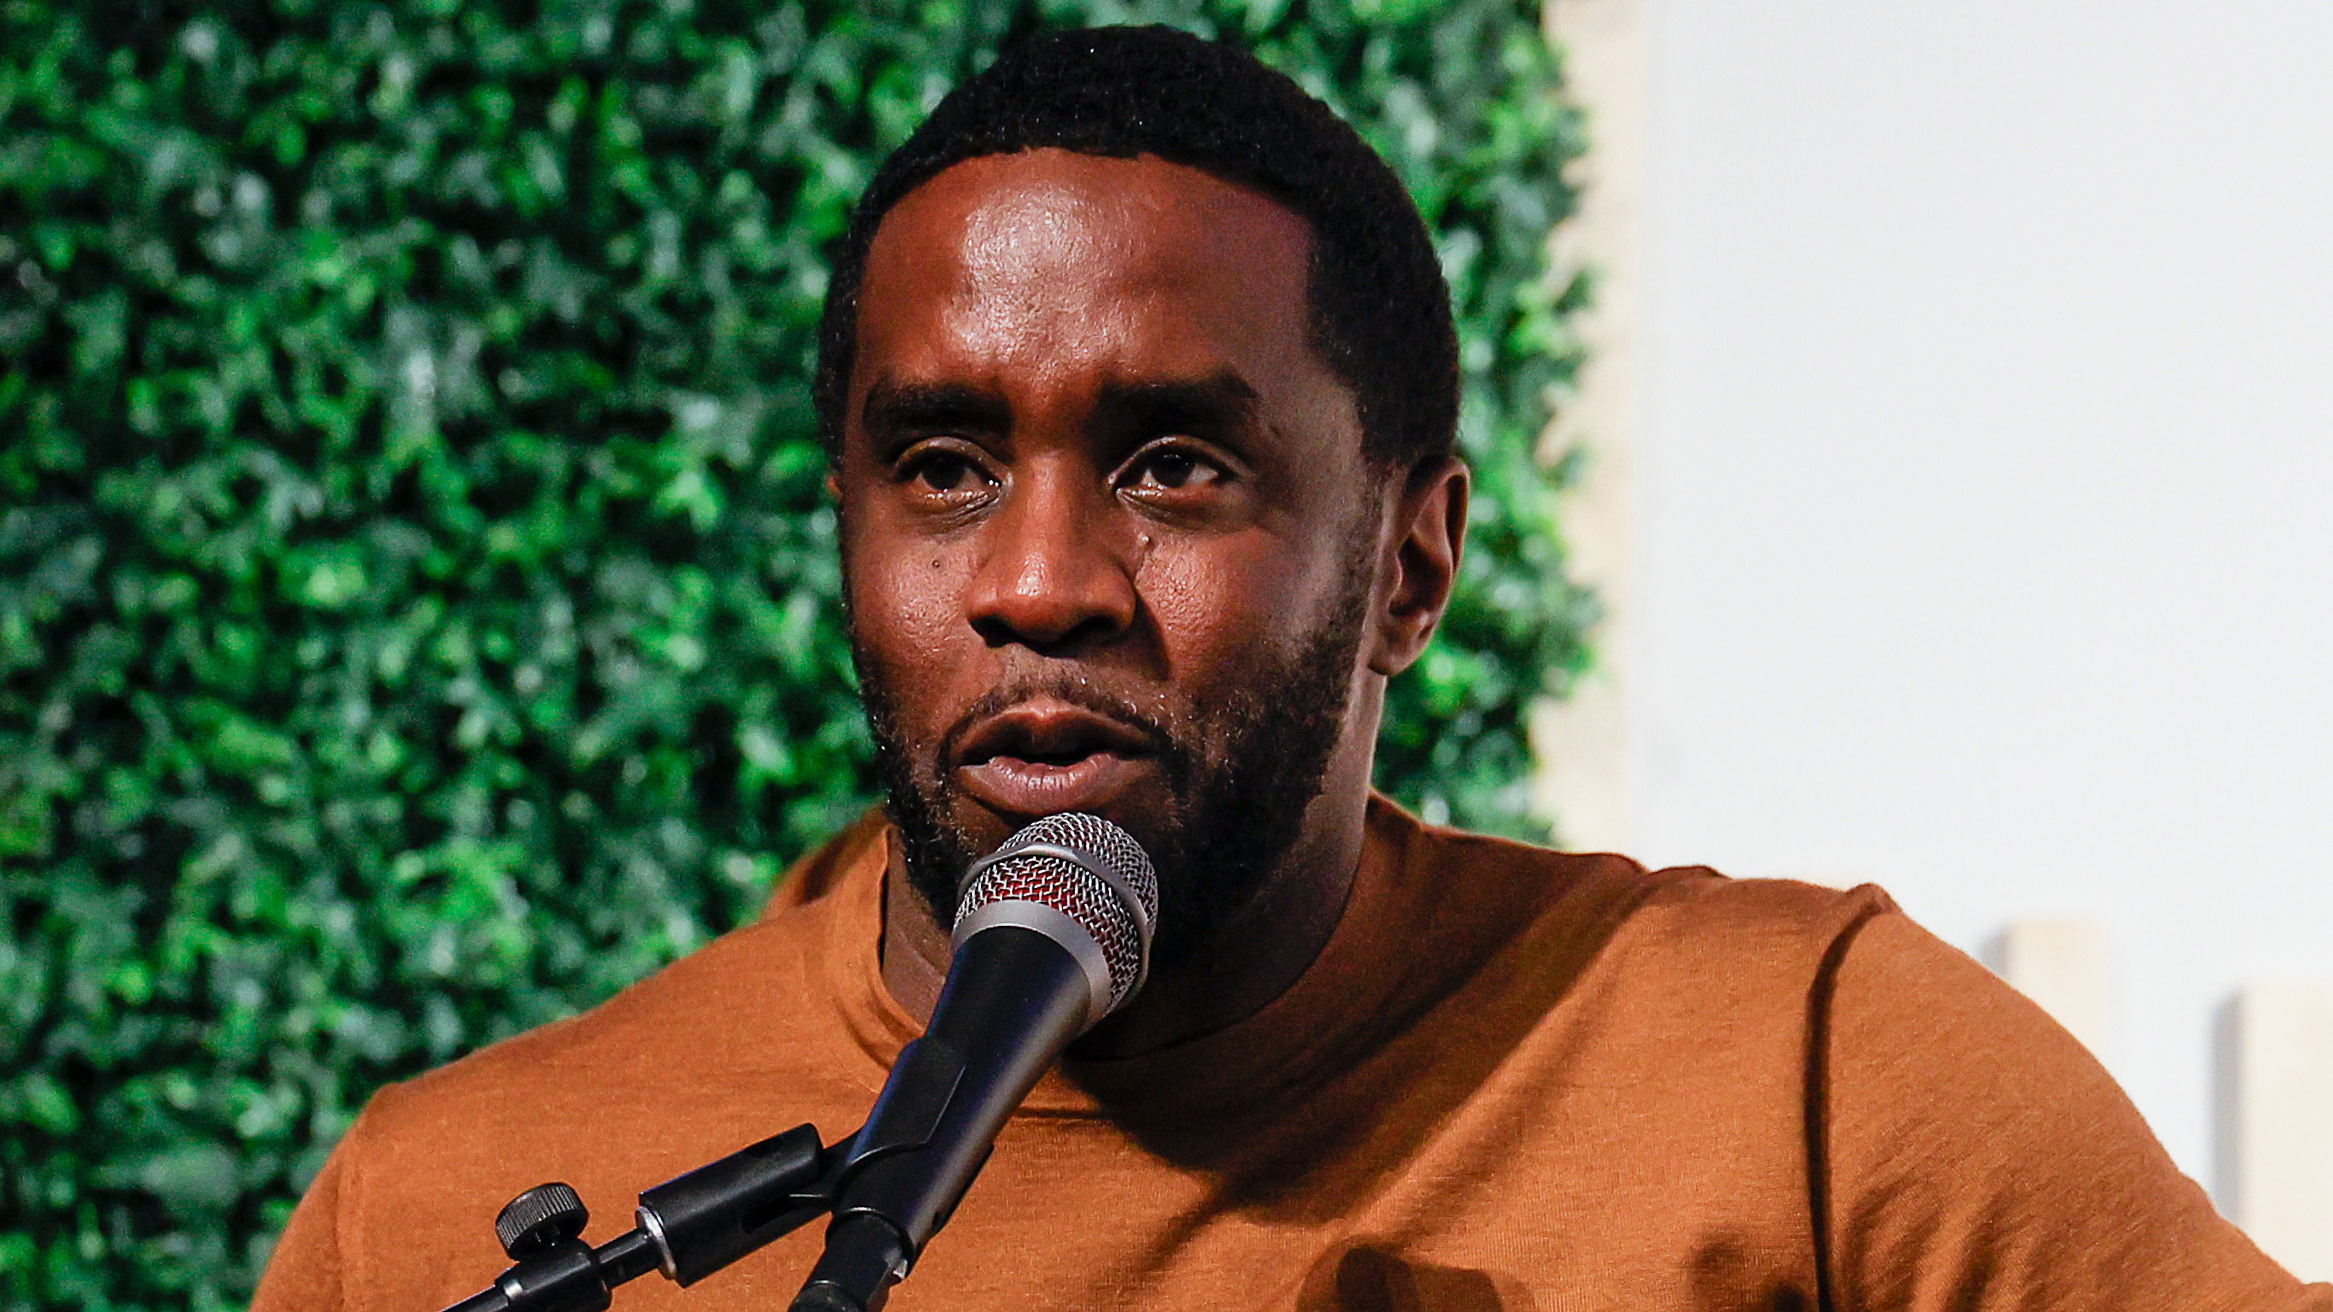 Celebrity World Criticizes Sean ‘Diddy’ Combs Over Alleged Attack Video